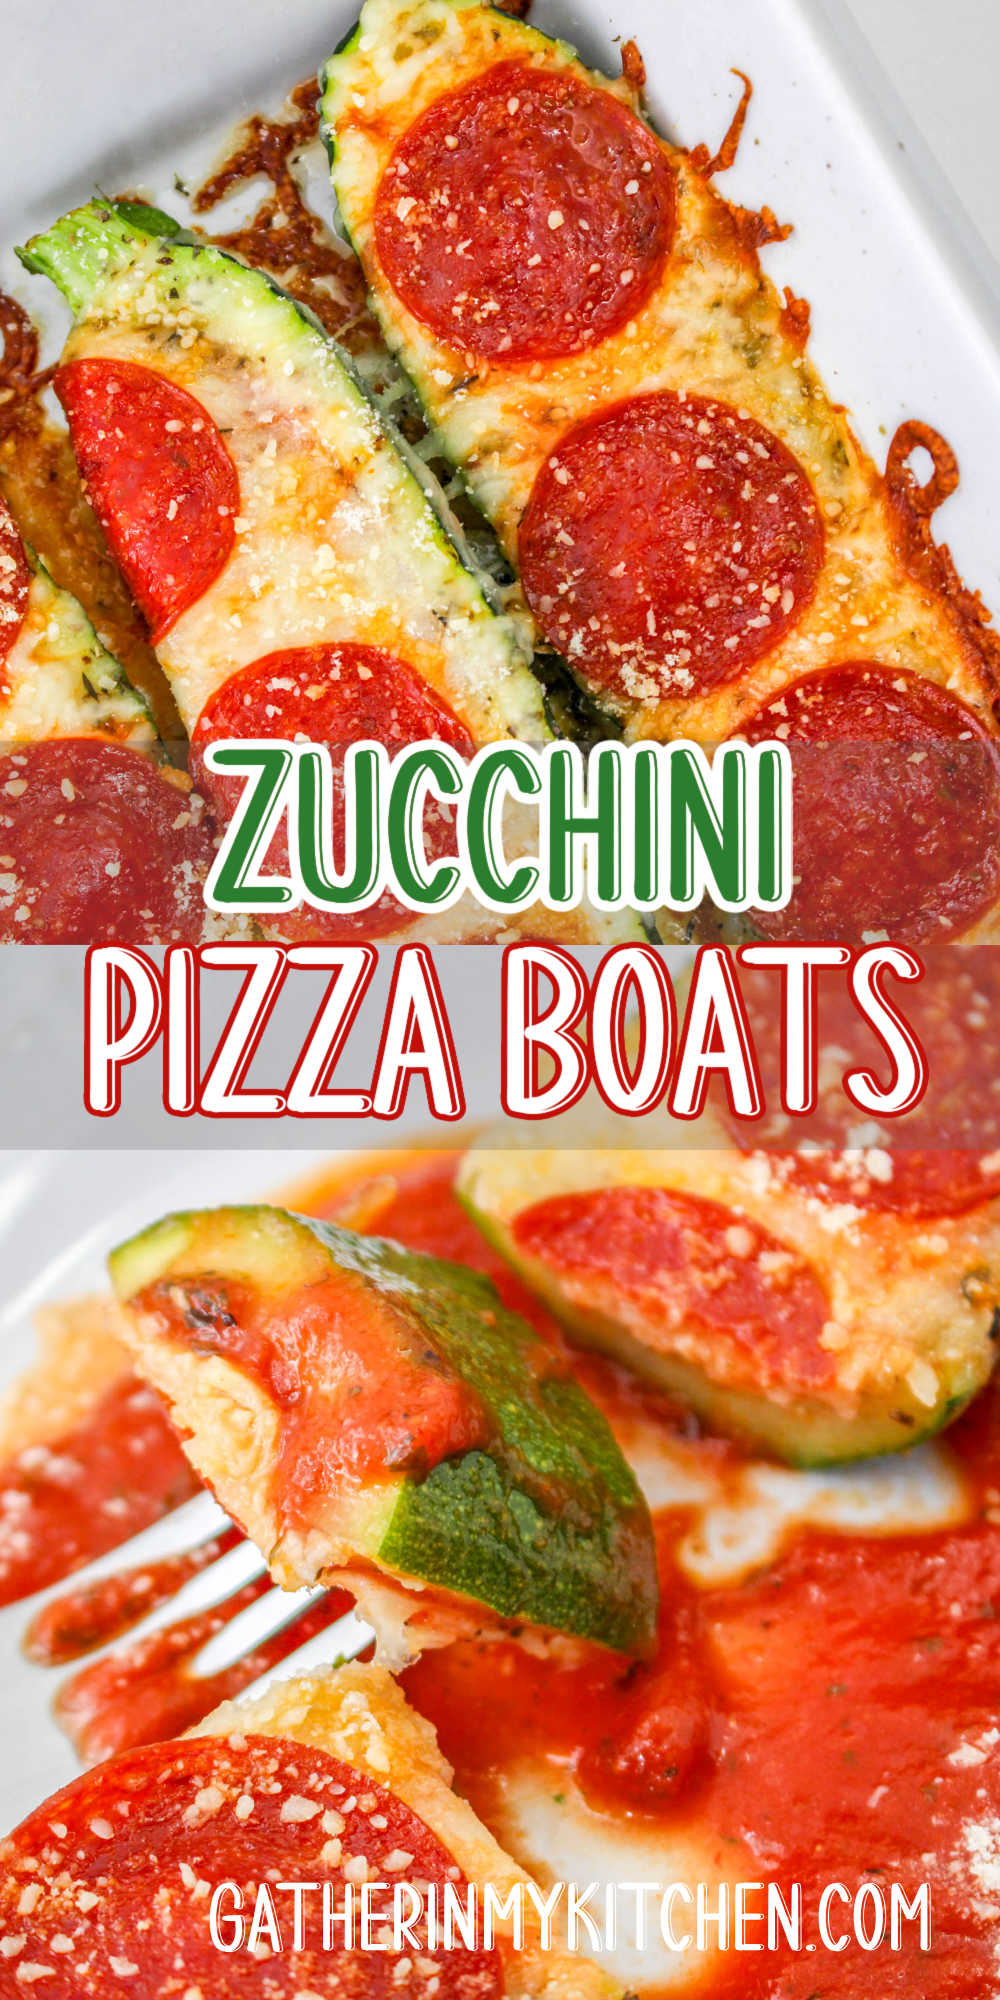 Pin image: top and bottom have zucchini pizza boats and middle says "Zucchini Pizza Boats".